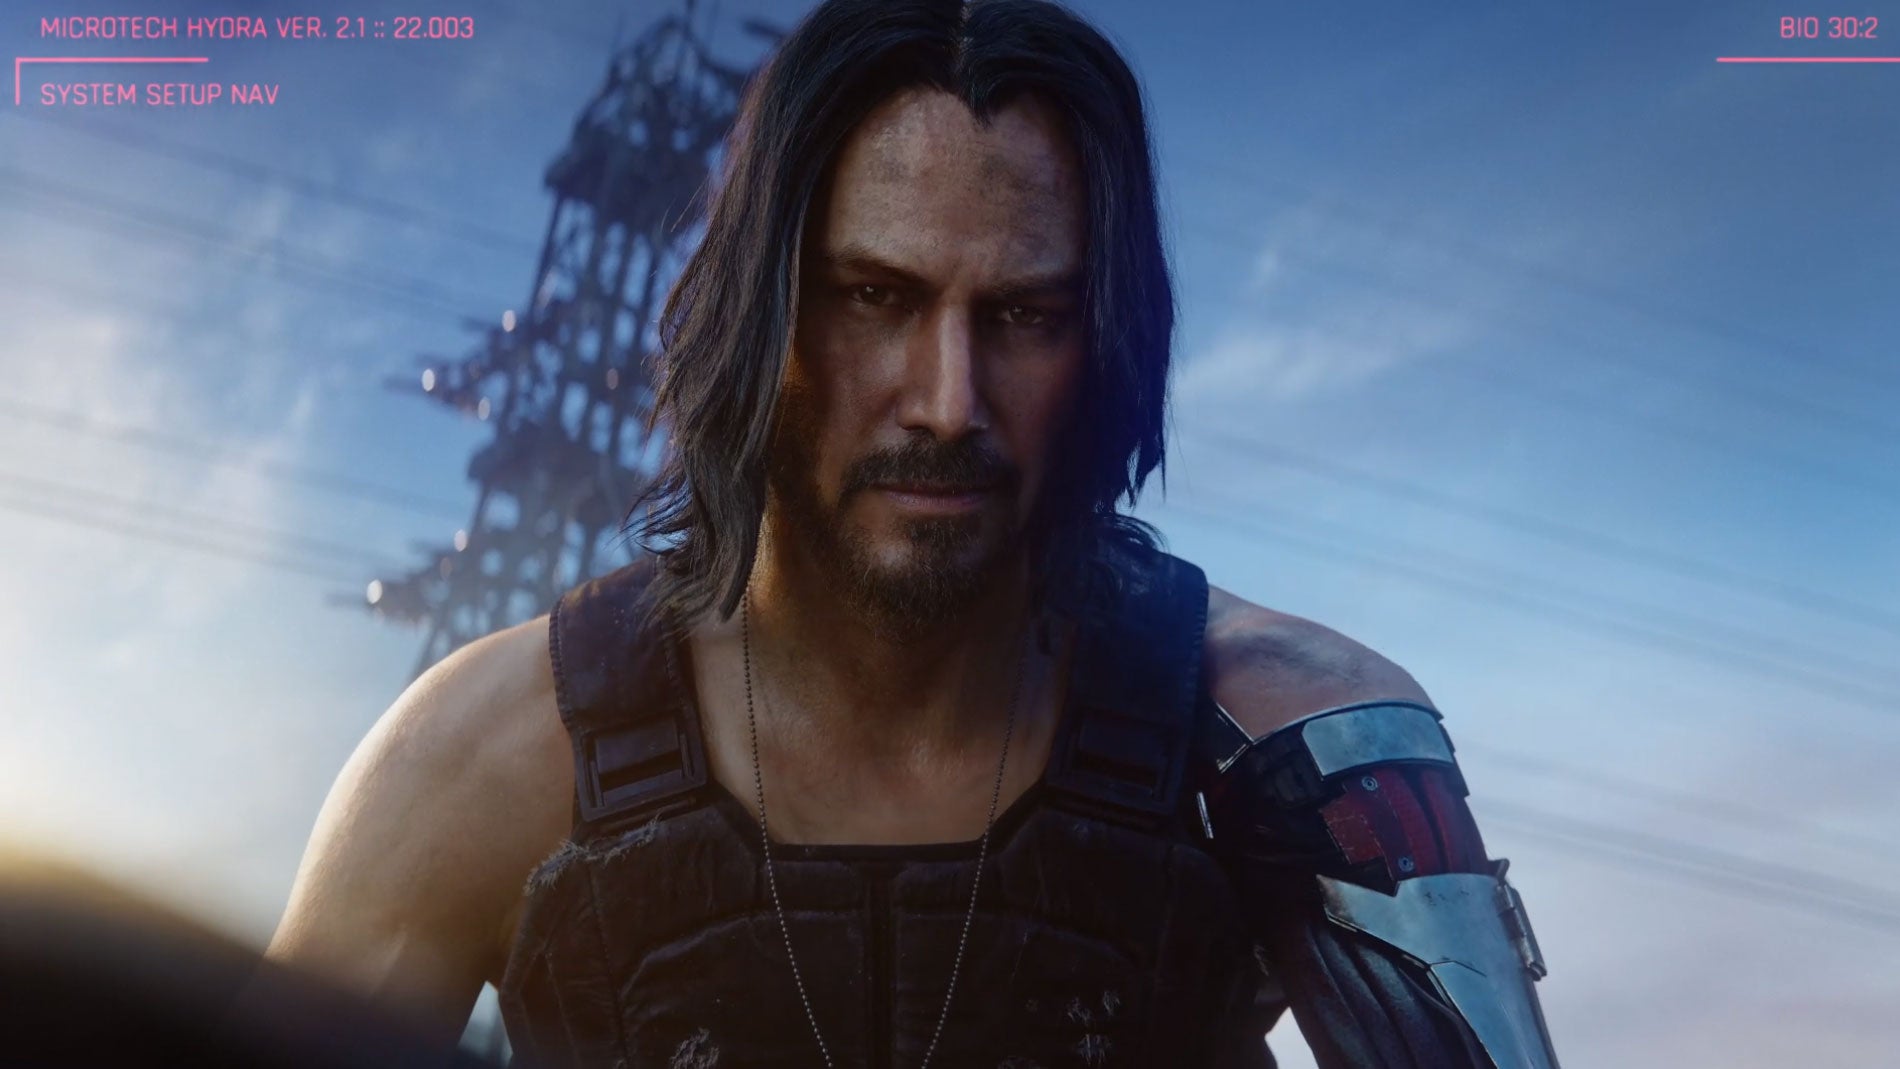 Cyberpunk 2077 Comes Out In April 2020, Will Feature Keanu Reeves